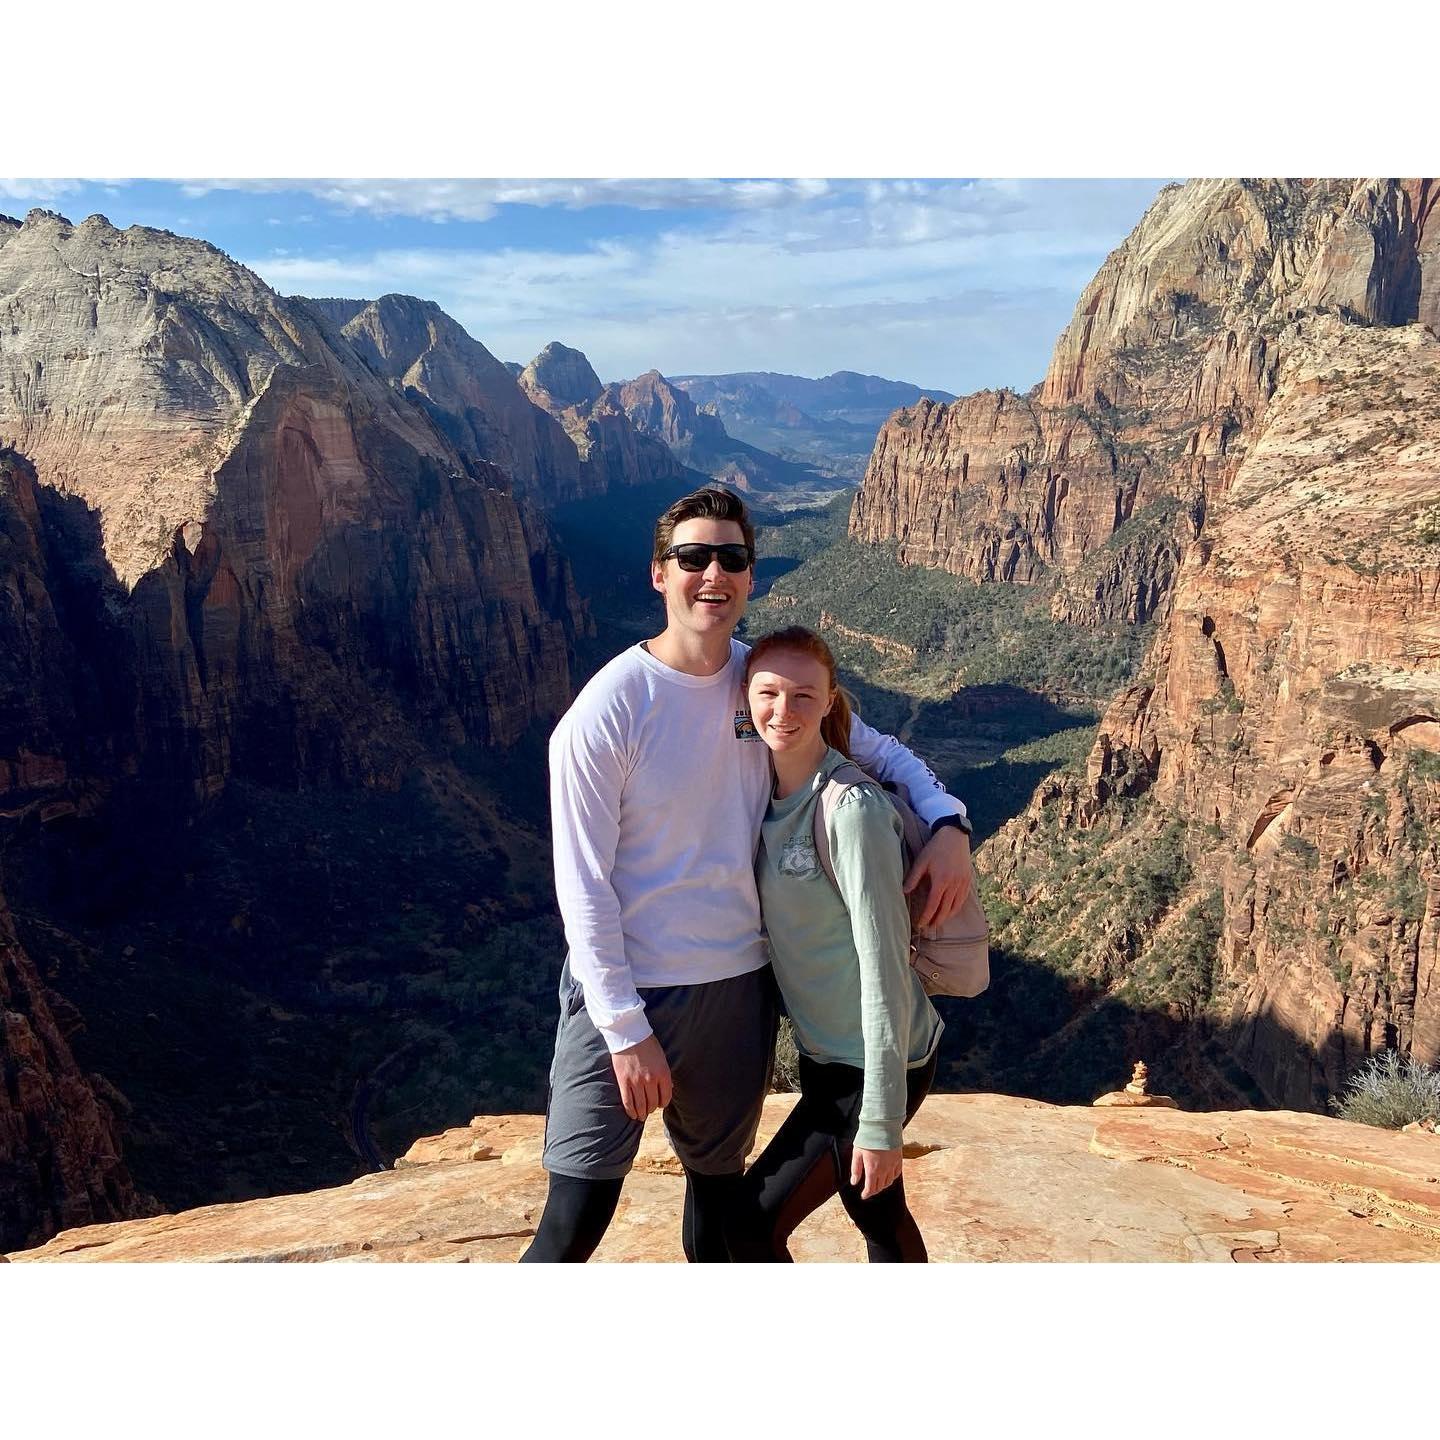 At the top of Angel's Landing in Zion